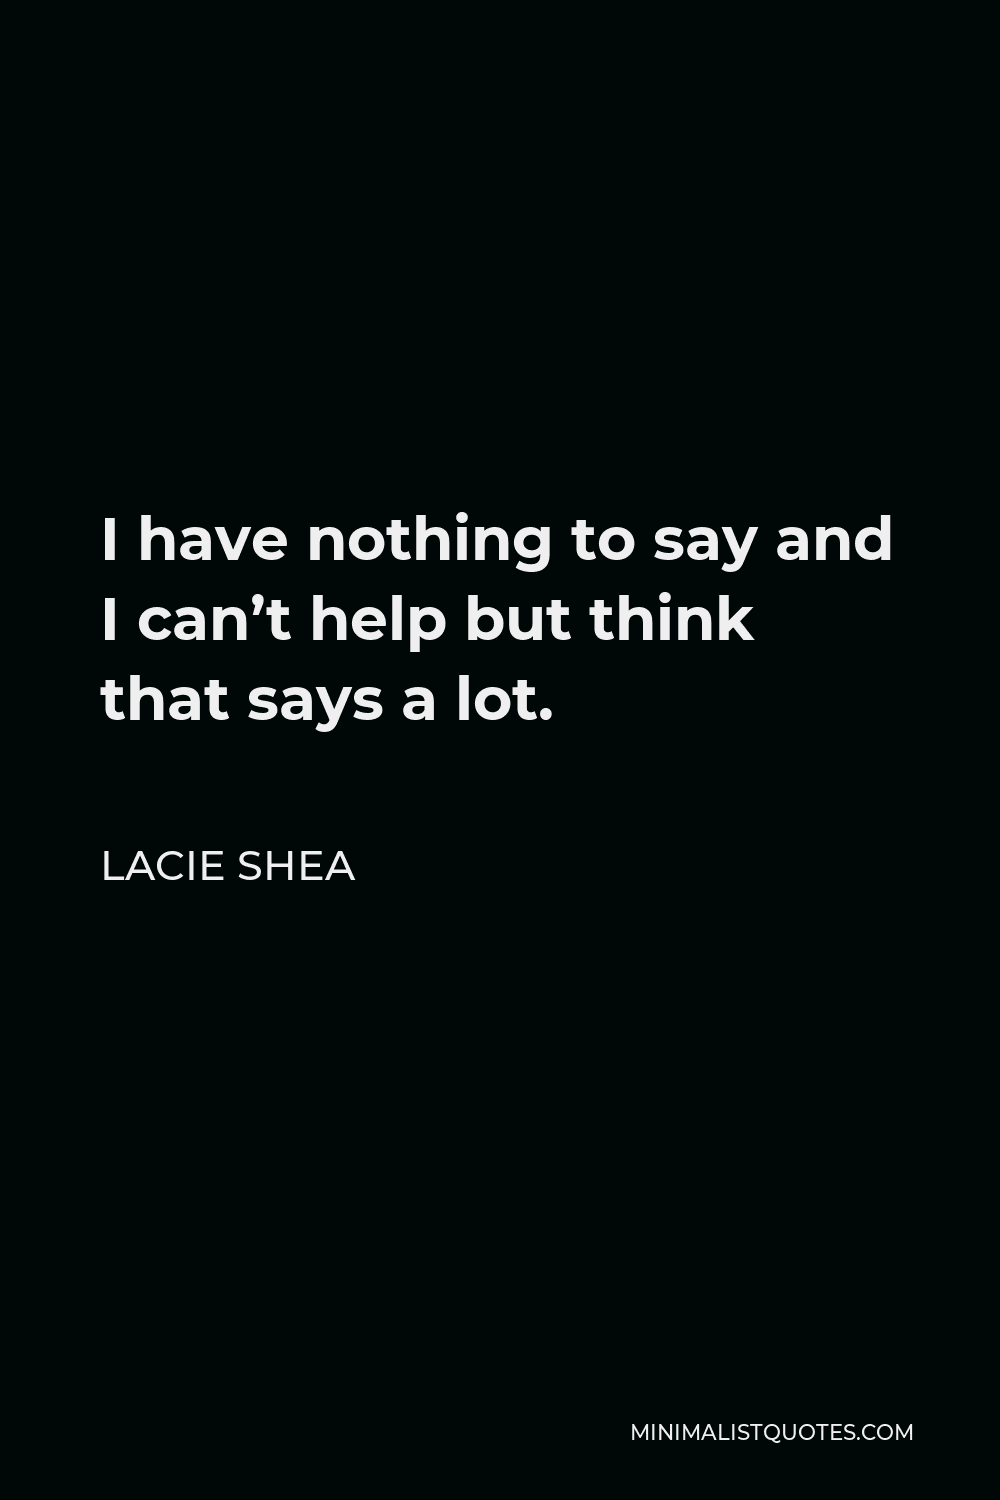 Lacie Shea Quote - I have nothing to say and I can’t help but think that says a lot.